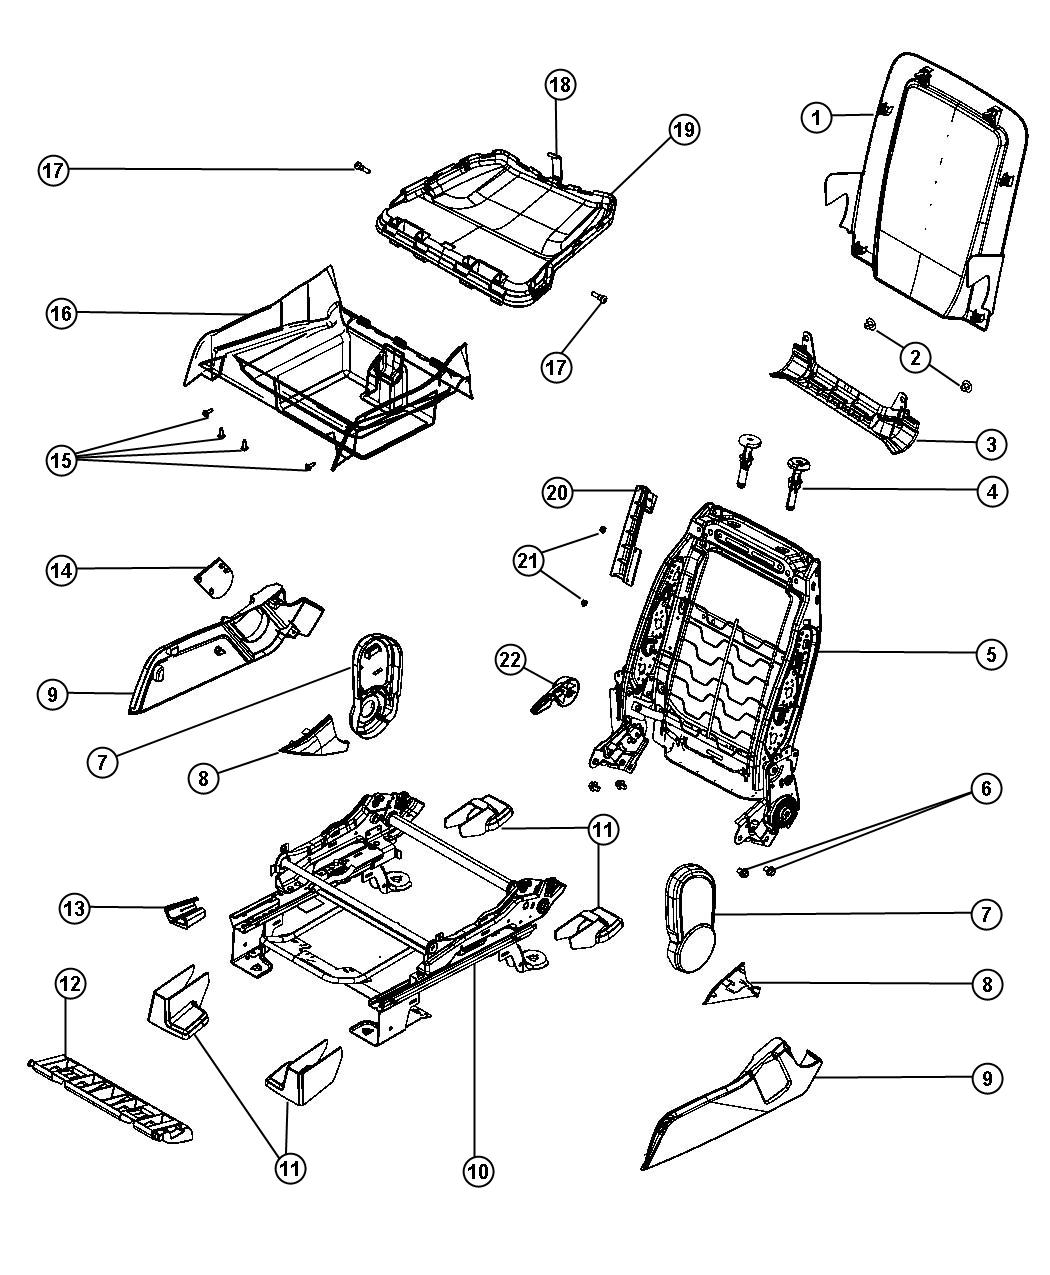 Adjusters, Recliners and Shields - Passenger Seat - Fold Flat. Diagram